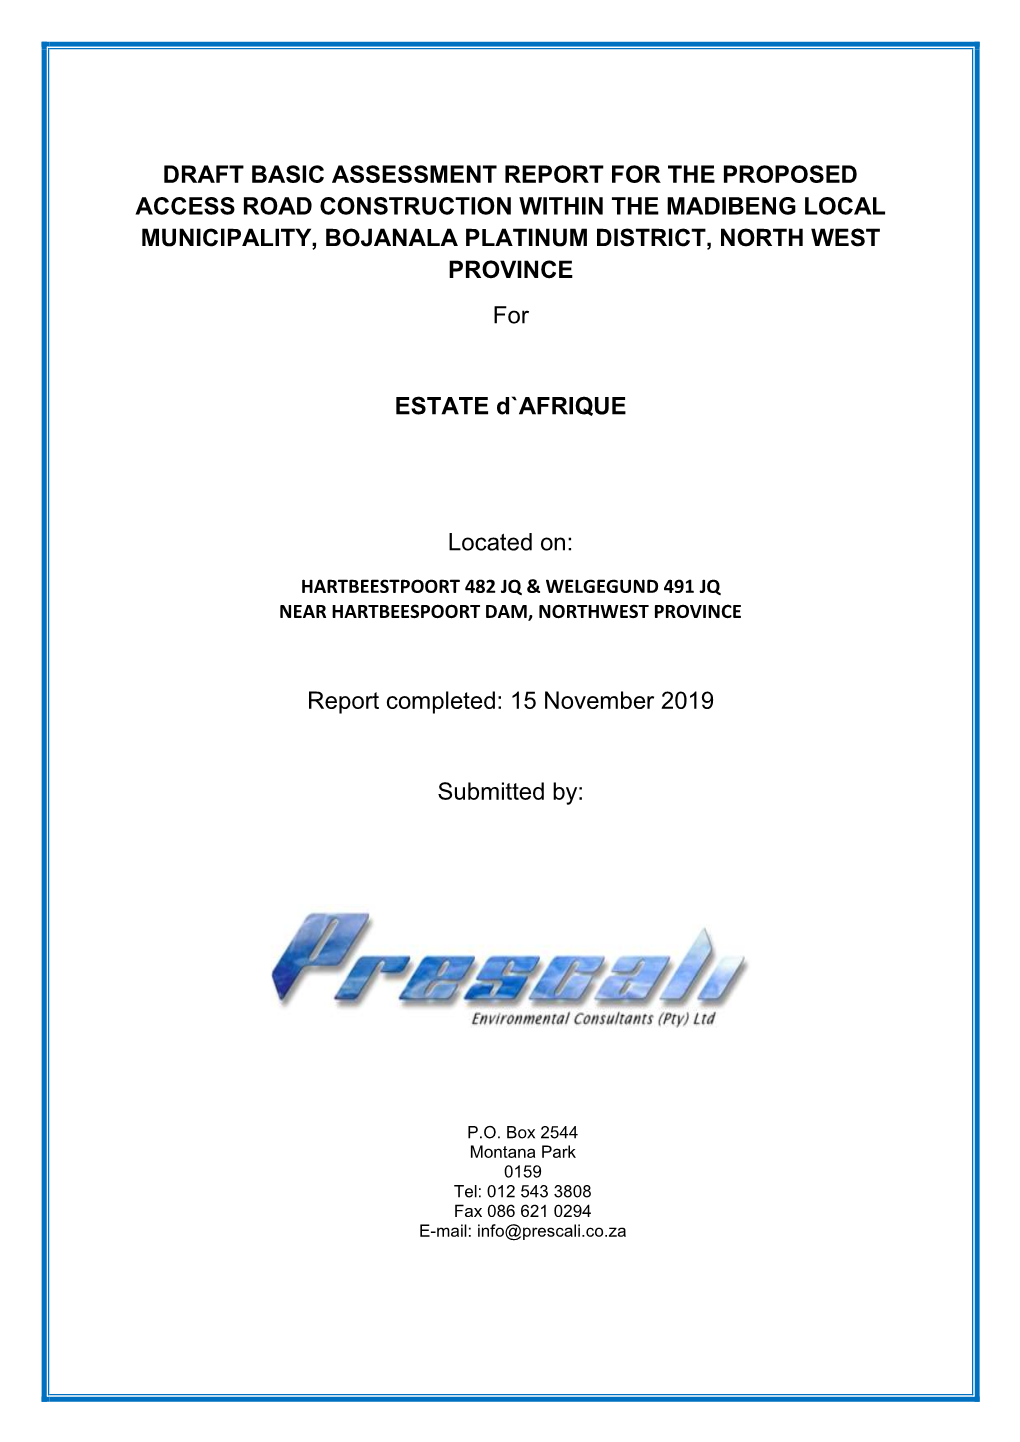 DRAFT BASIC ASSESSMENT REPORT for the PROPOSED ACCESS ROAD CONSTRUCTION WITHIN the MADIBENG LOCAL MUNICIPALITY, BOJANALA PLATINUM DISTRICT, NORTH WEST PROVINCE For